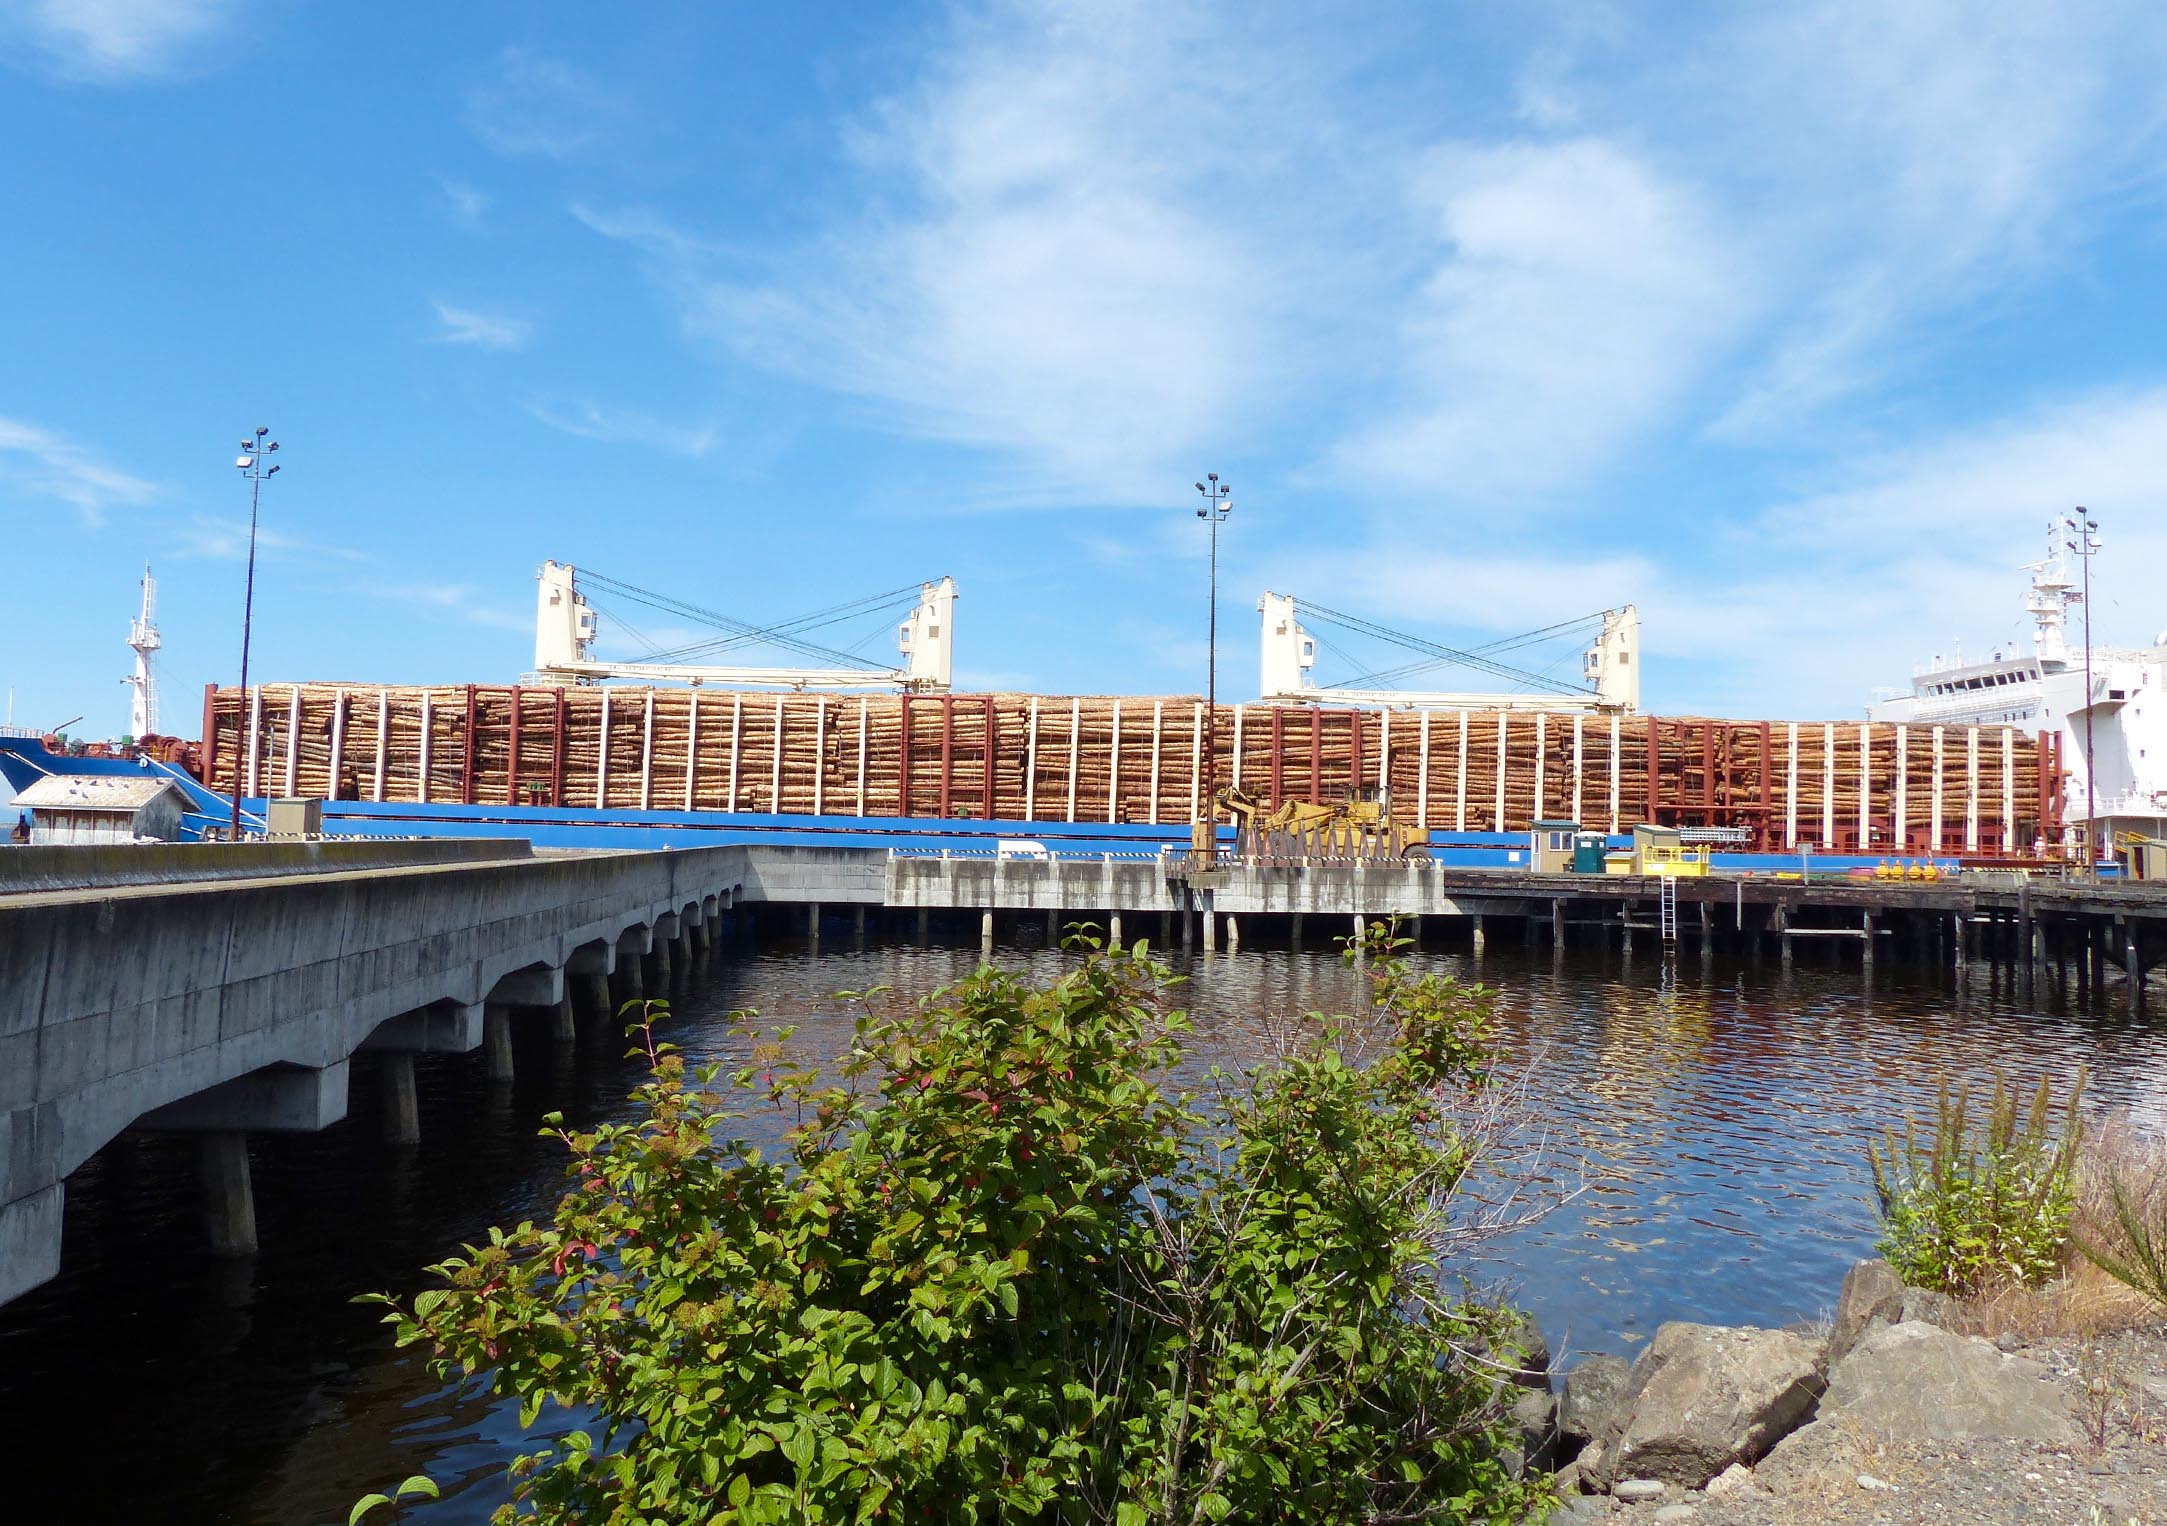 The fully loaded Jamaica Bay prepares to leave Port of Port Angeles Terminal 3 with 5.7 million board feet of logs bound for China.  —Photo by David G. Sellars/Peninsula Daily News